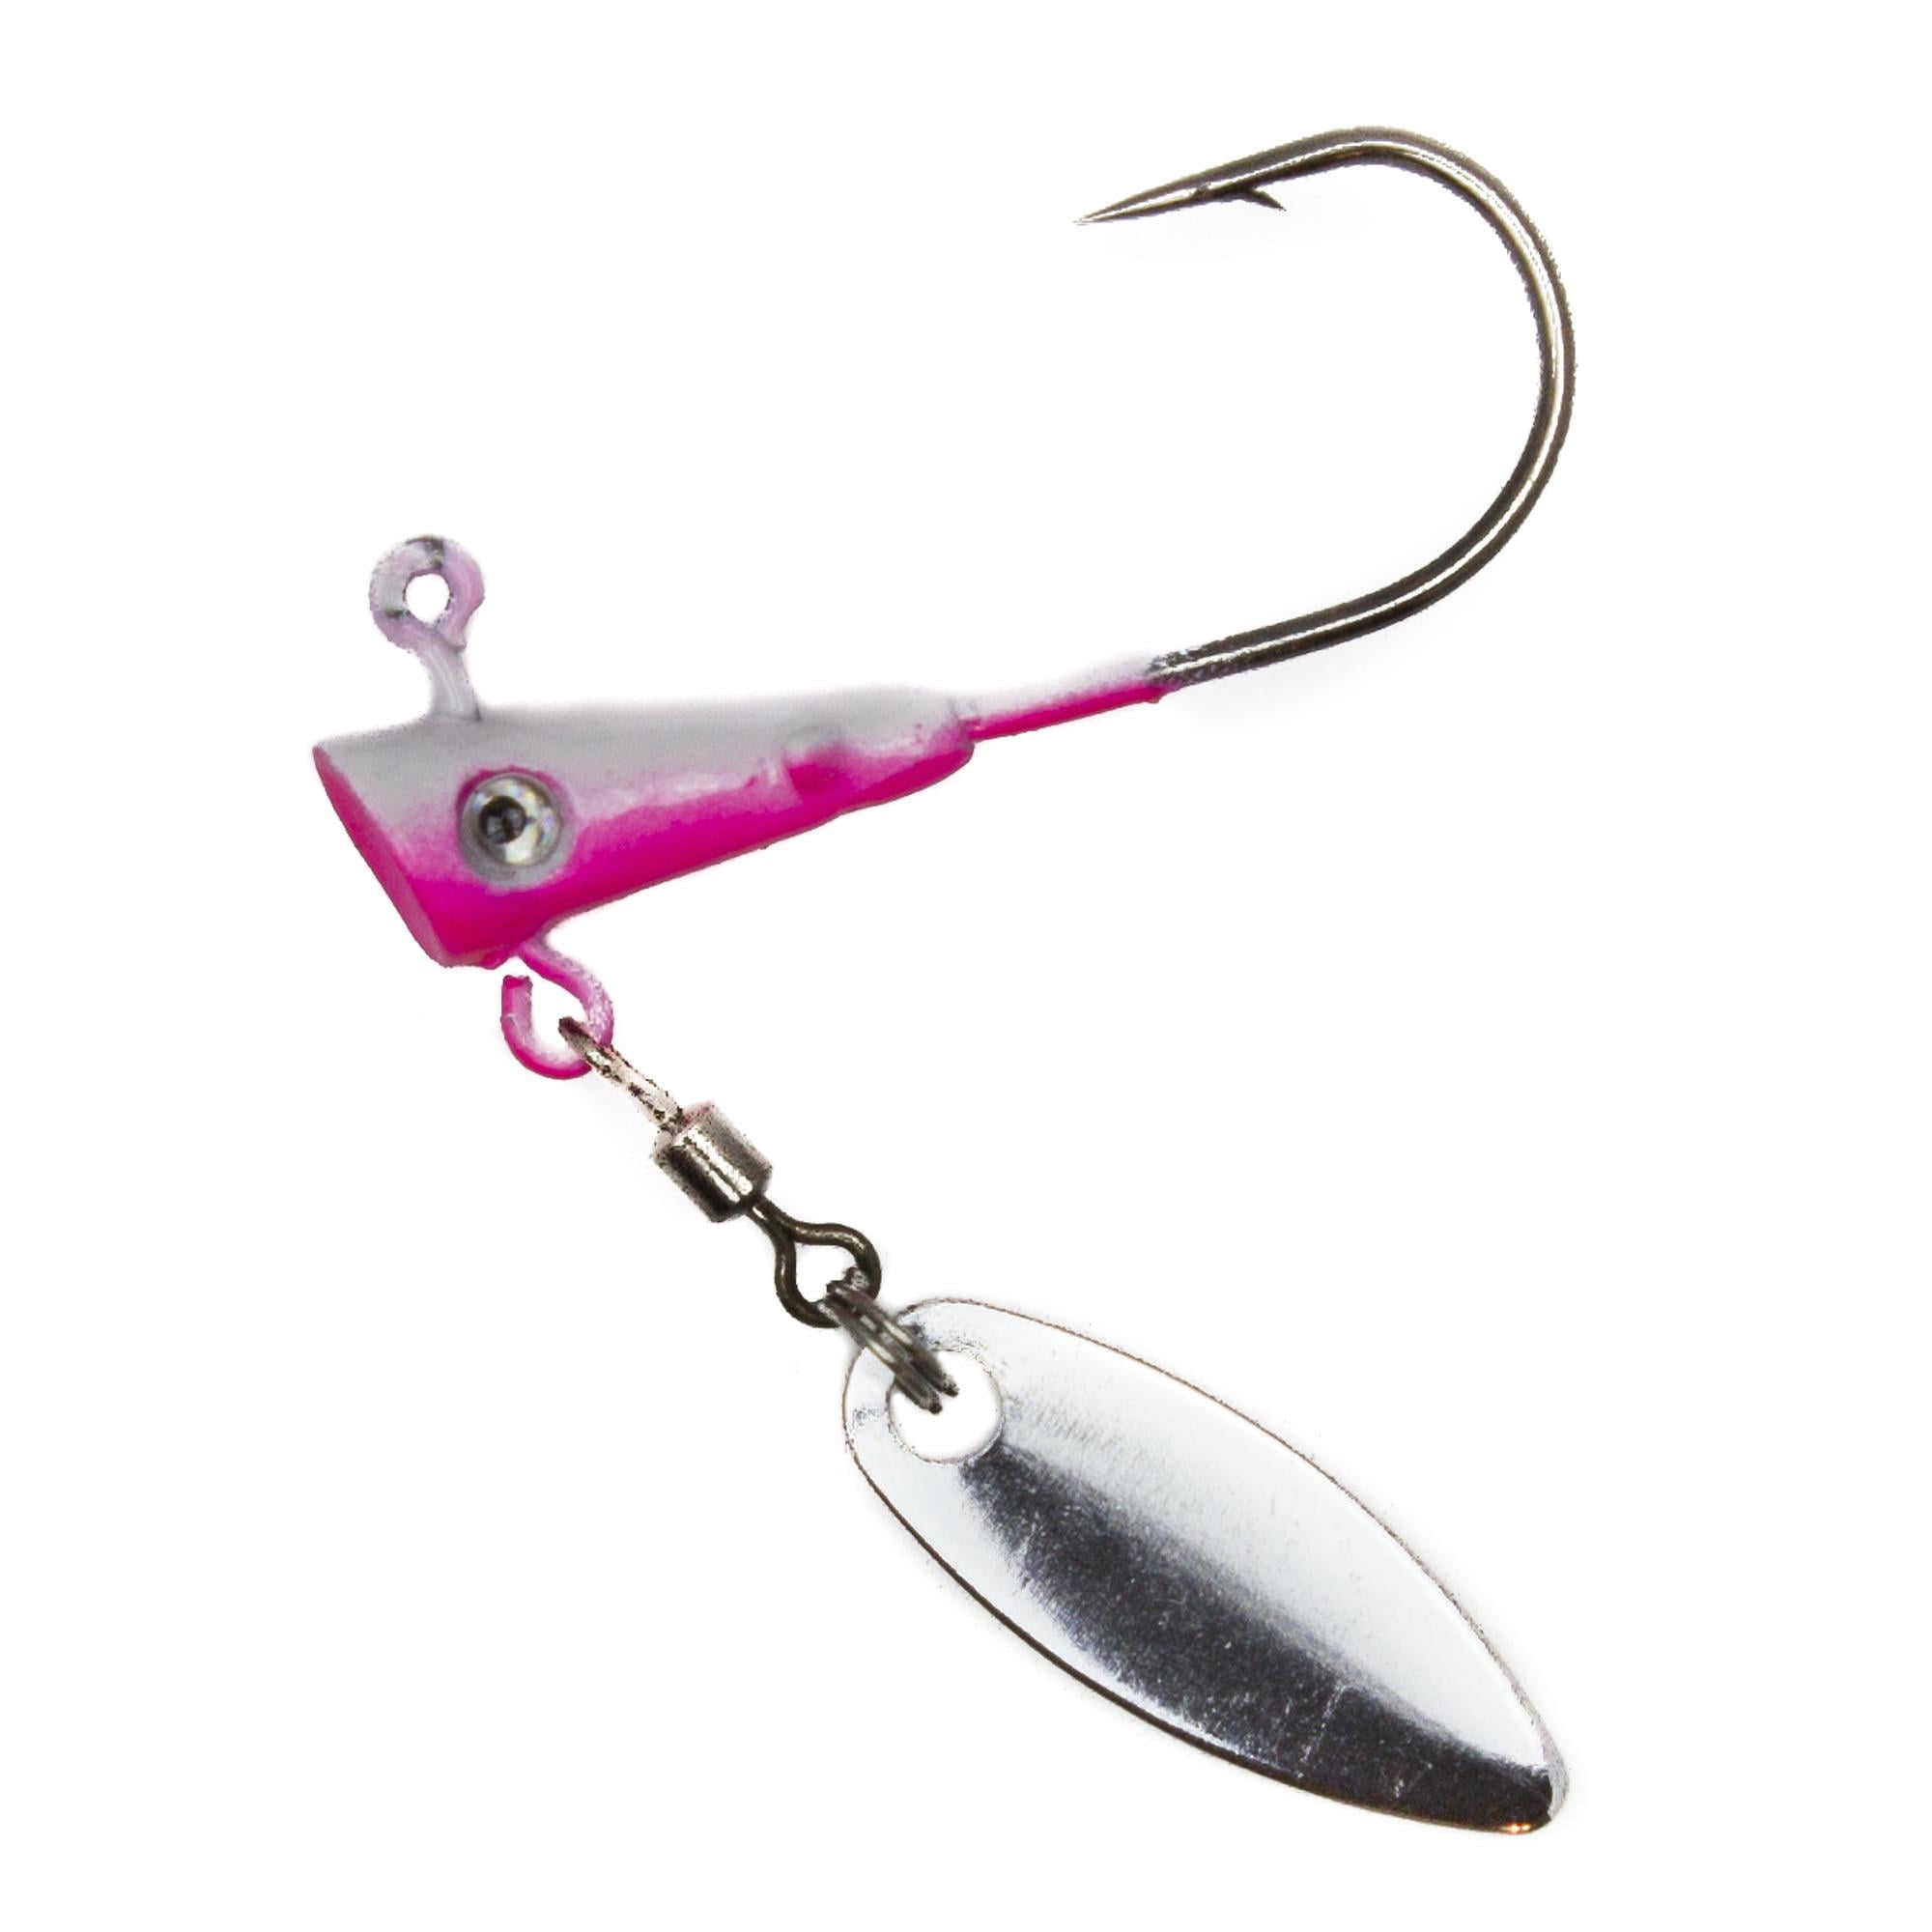 Fin Commander 17016 Fin Spin Jig Head 2pc Pack 1/16 oz. White And Pink 